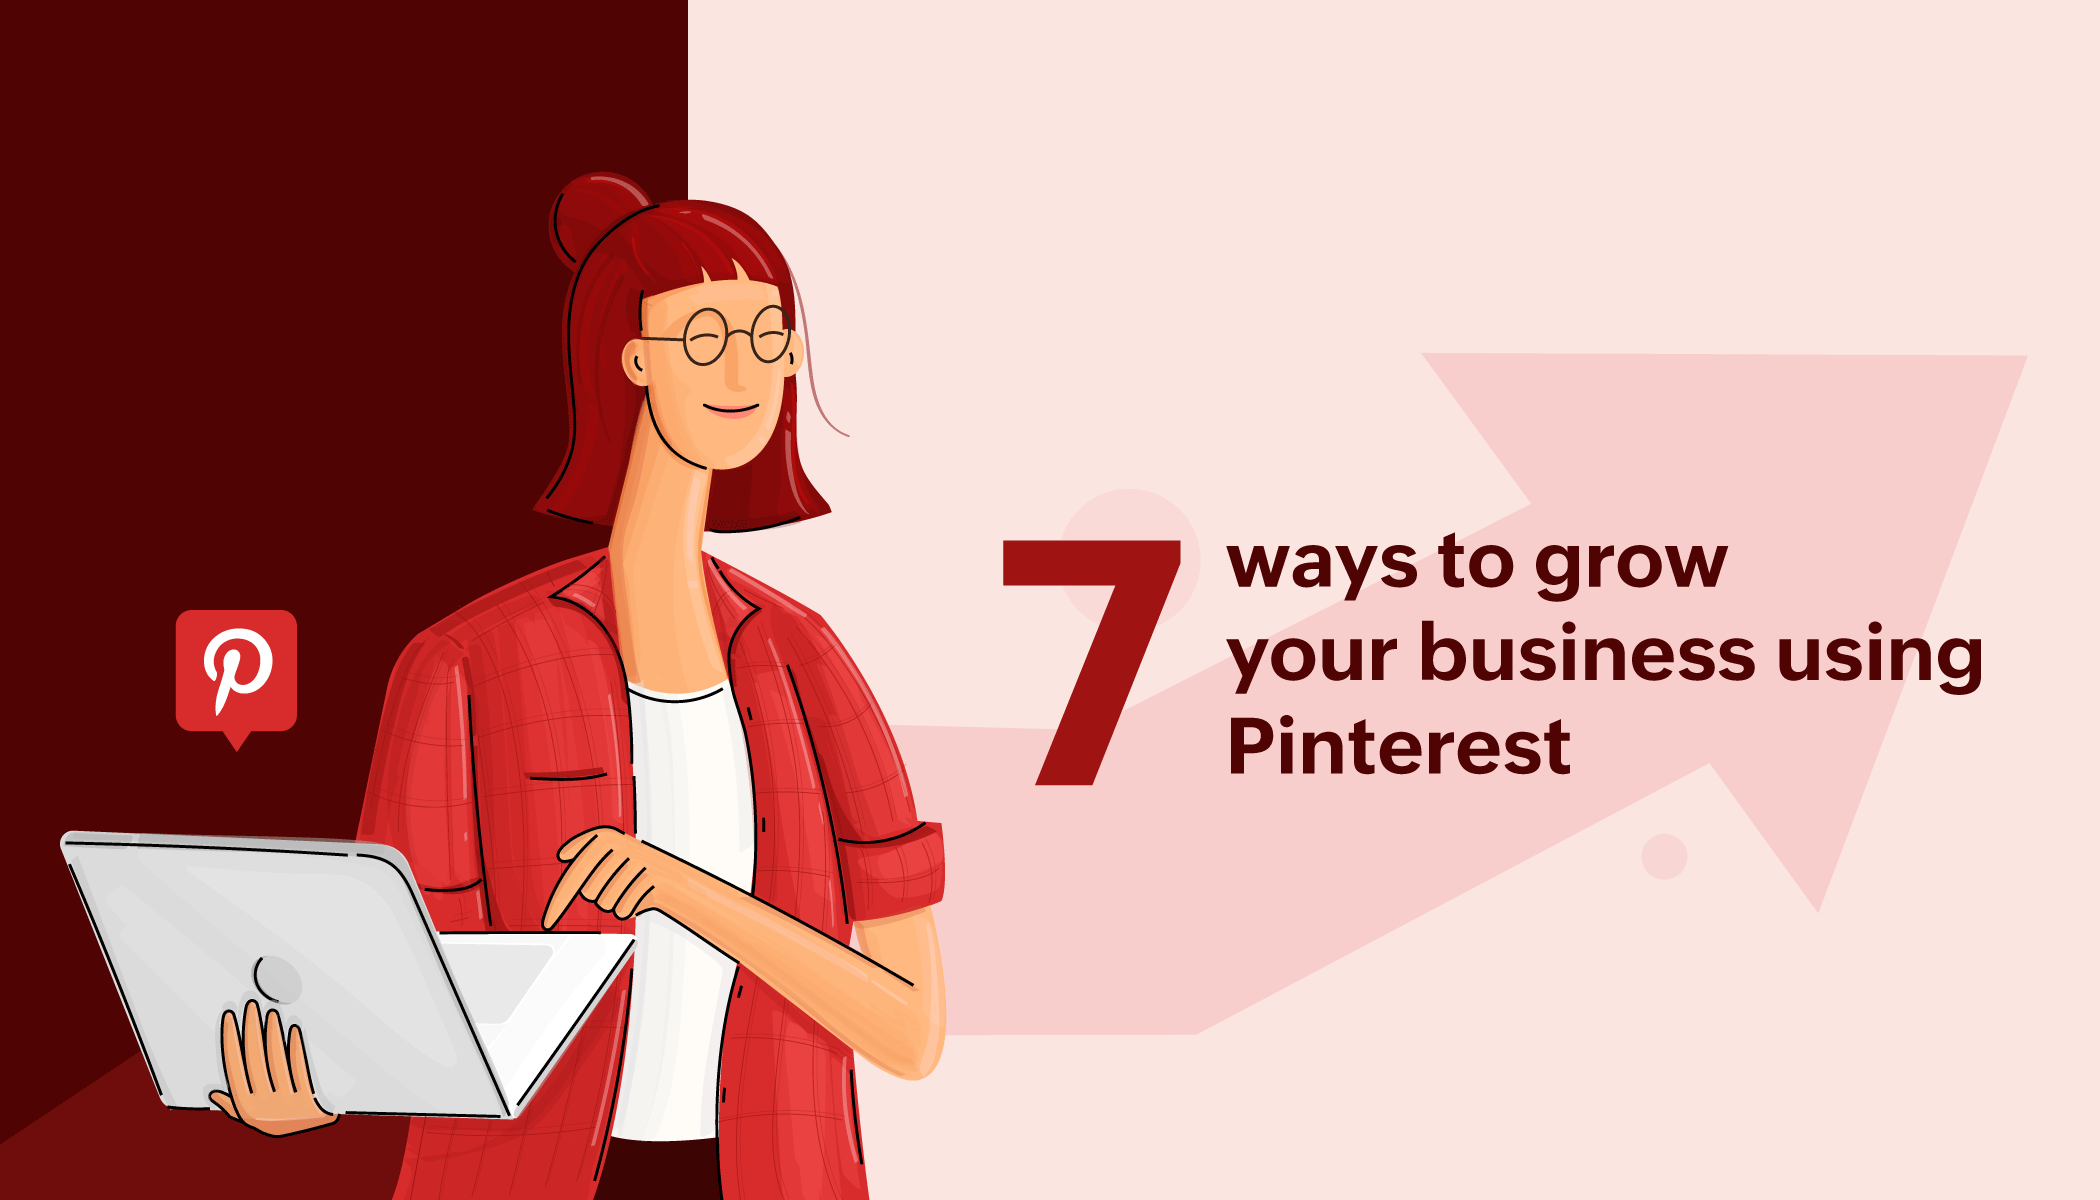 7 ways to grow your business using Pinterest